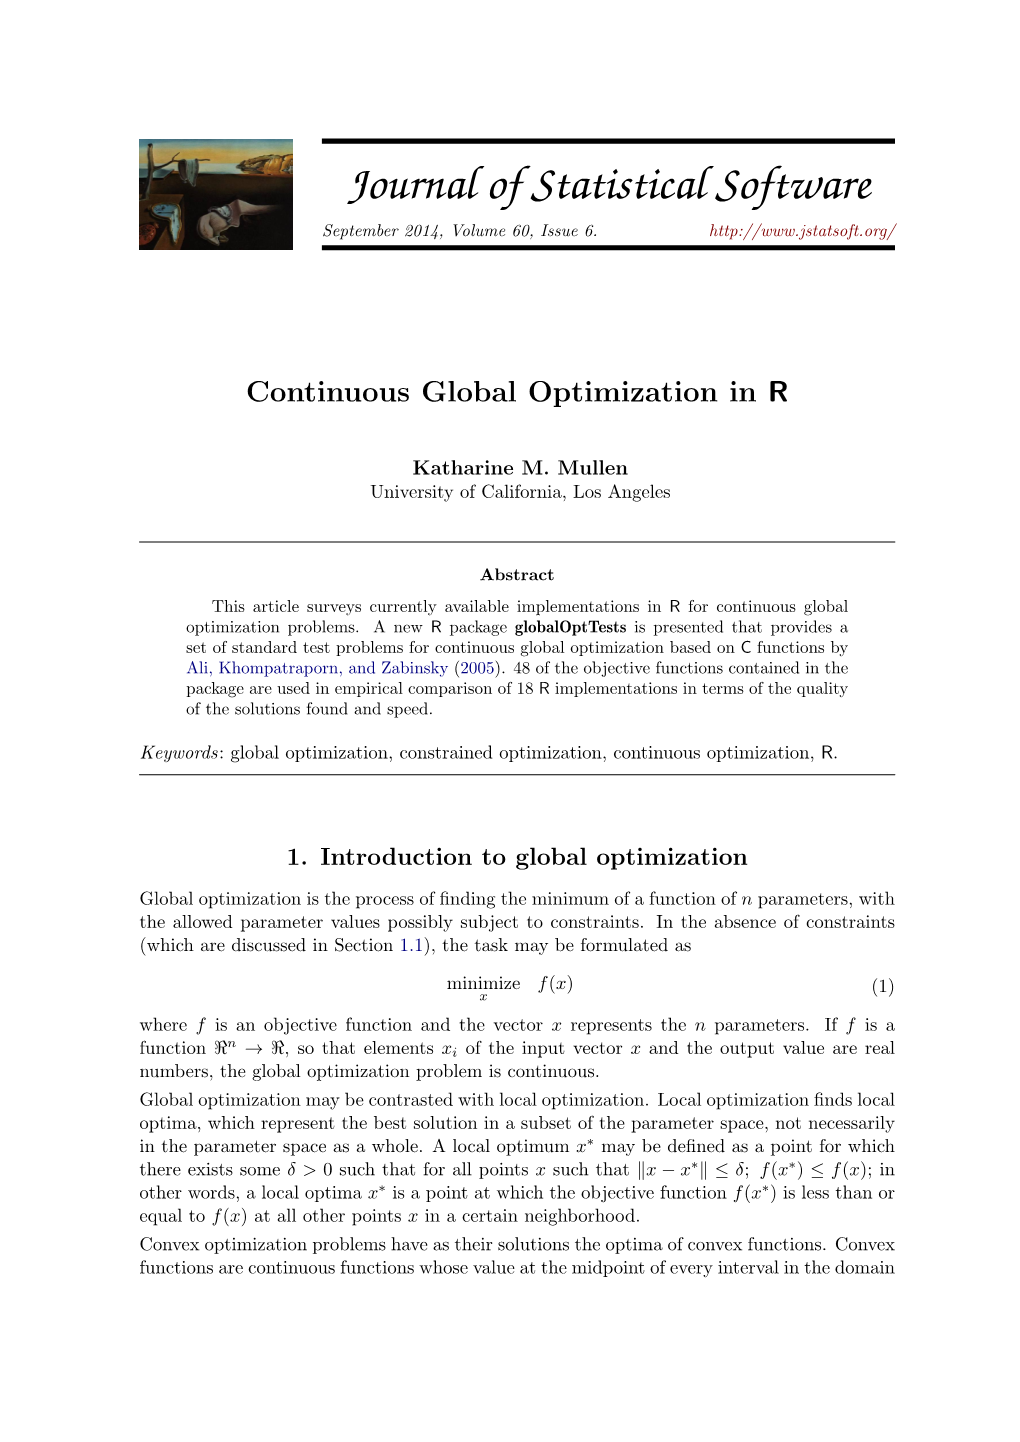 Continuous Global Optimization in R